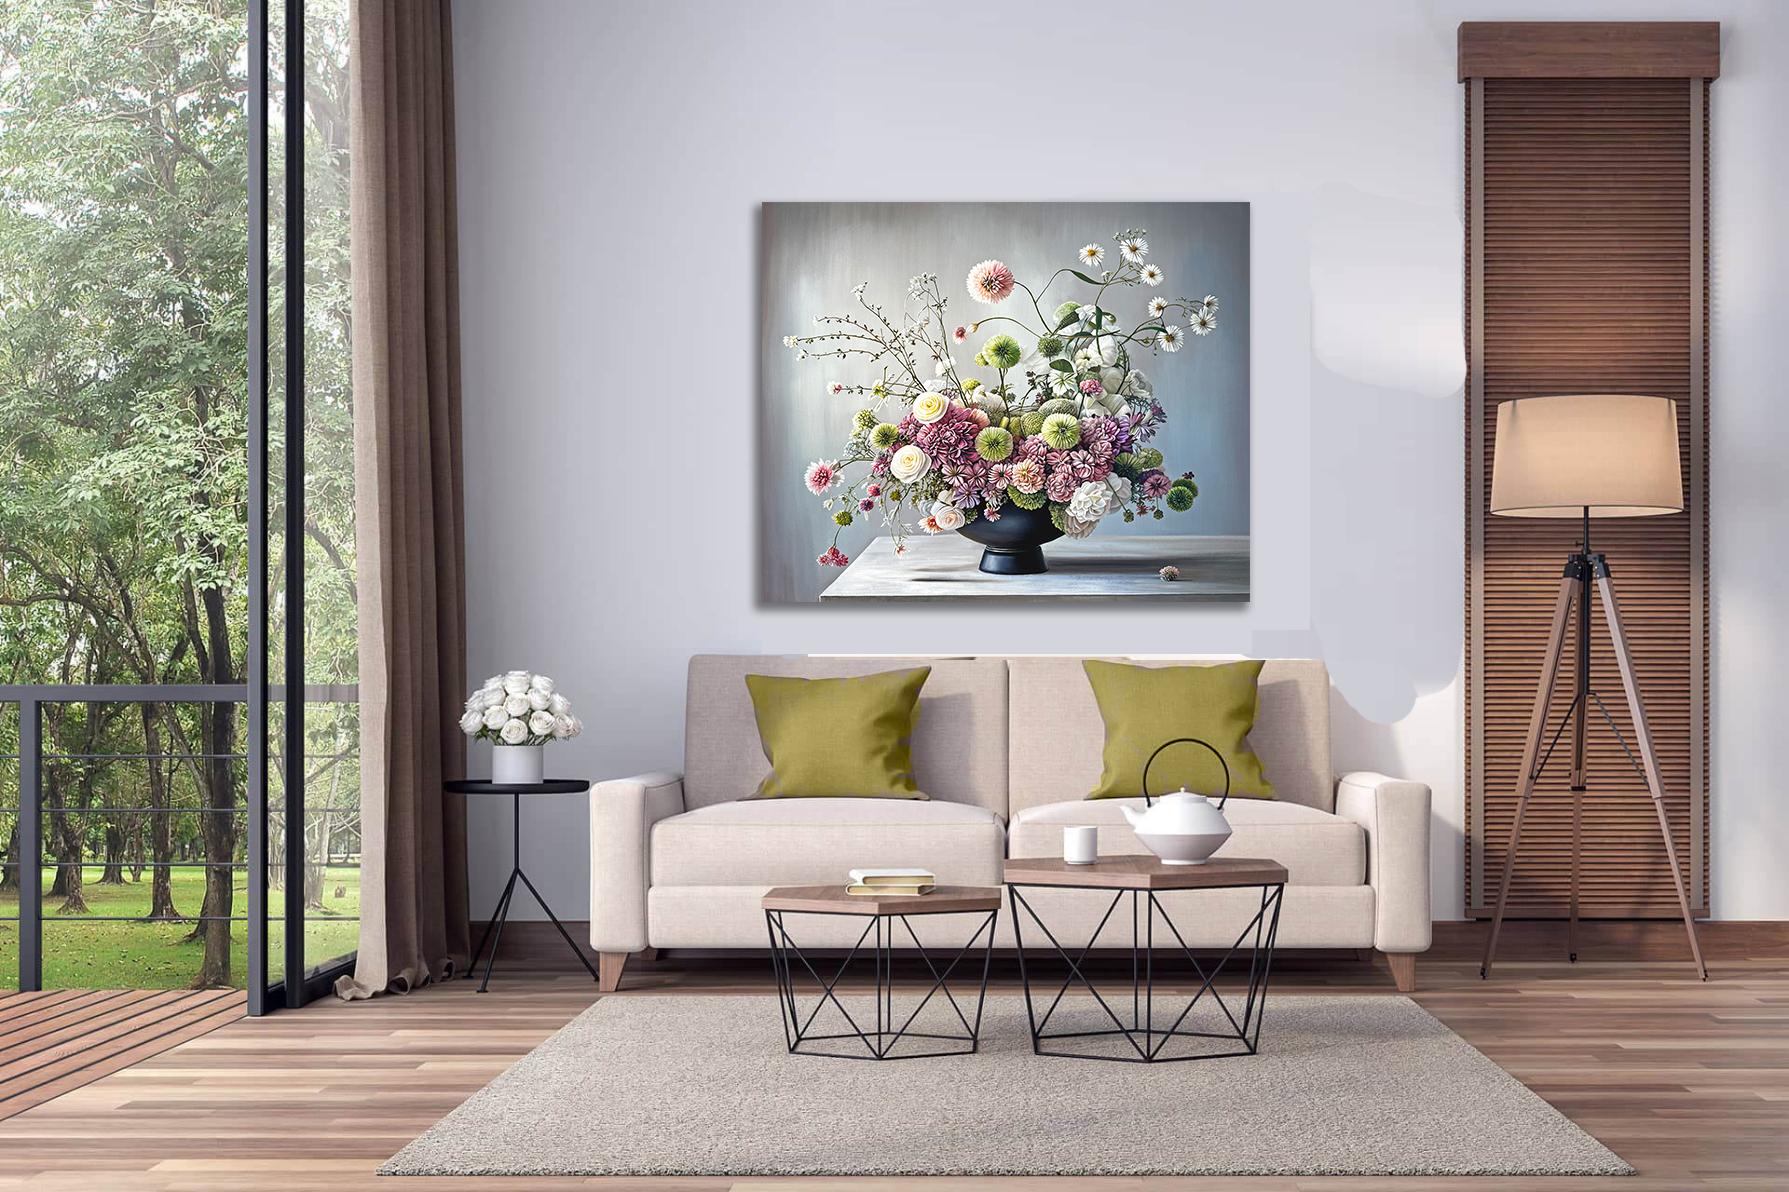 Let's go upward together by K Husslein Botanical Hyperrealistic Still life  - Abstract Painting by Katharina Husslein